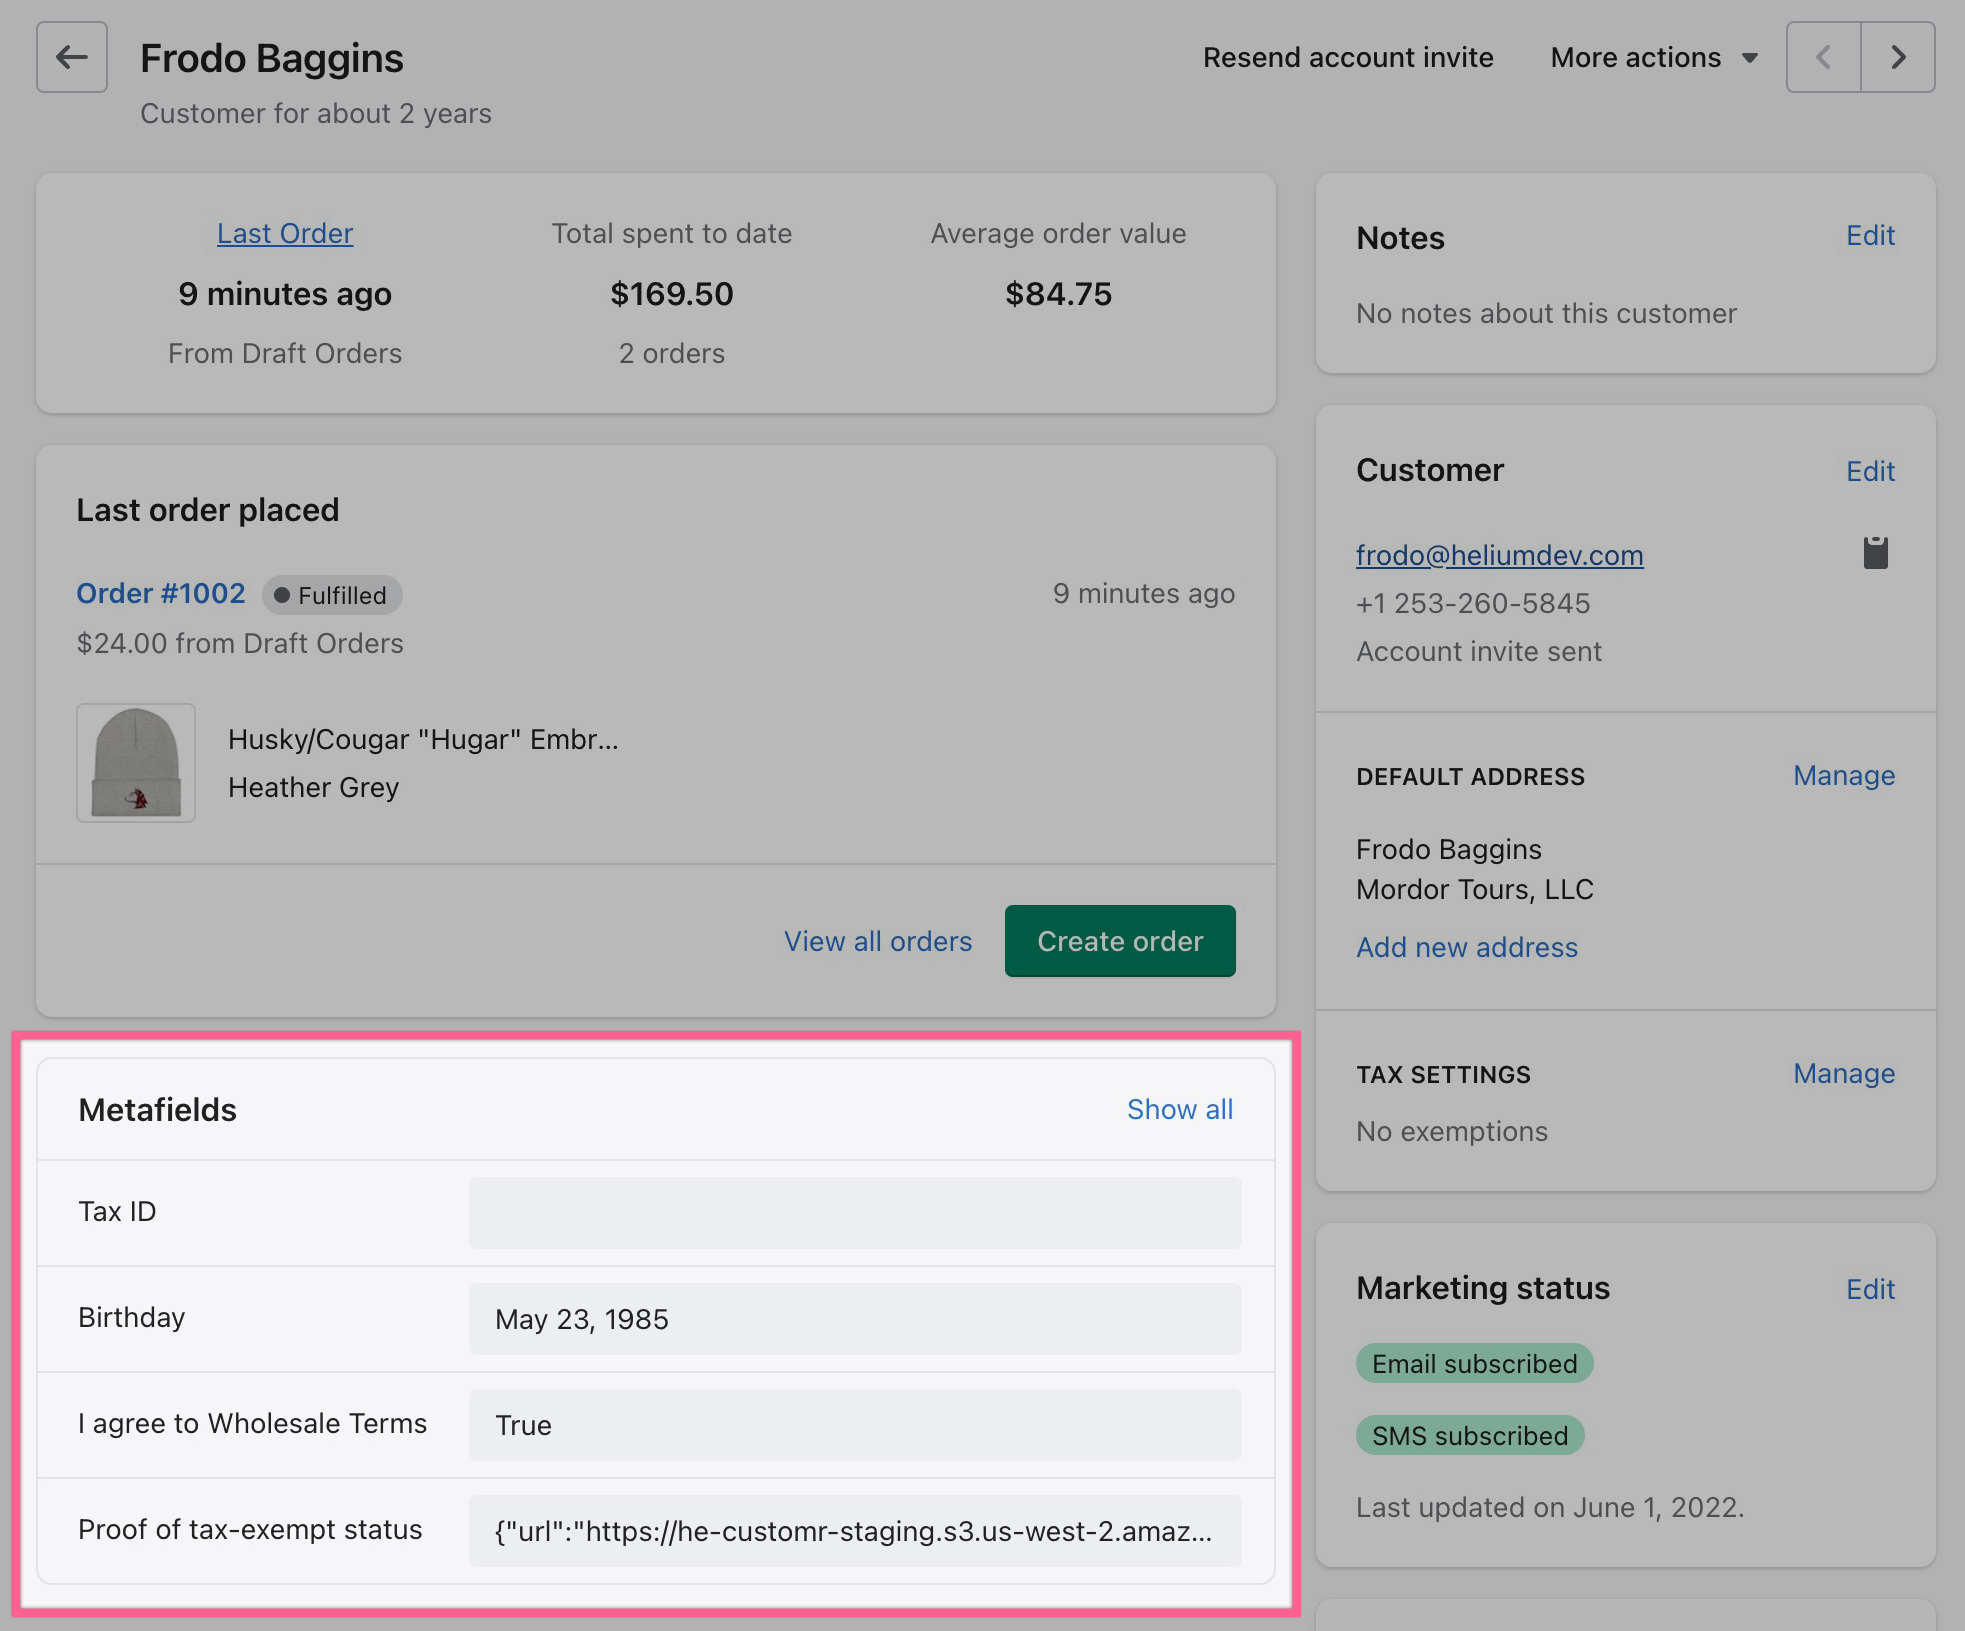 Shopify customer metafields allow you to see and edit custom data about your customers